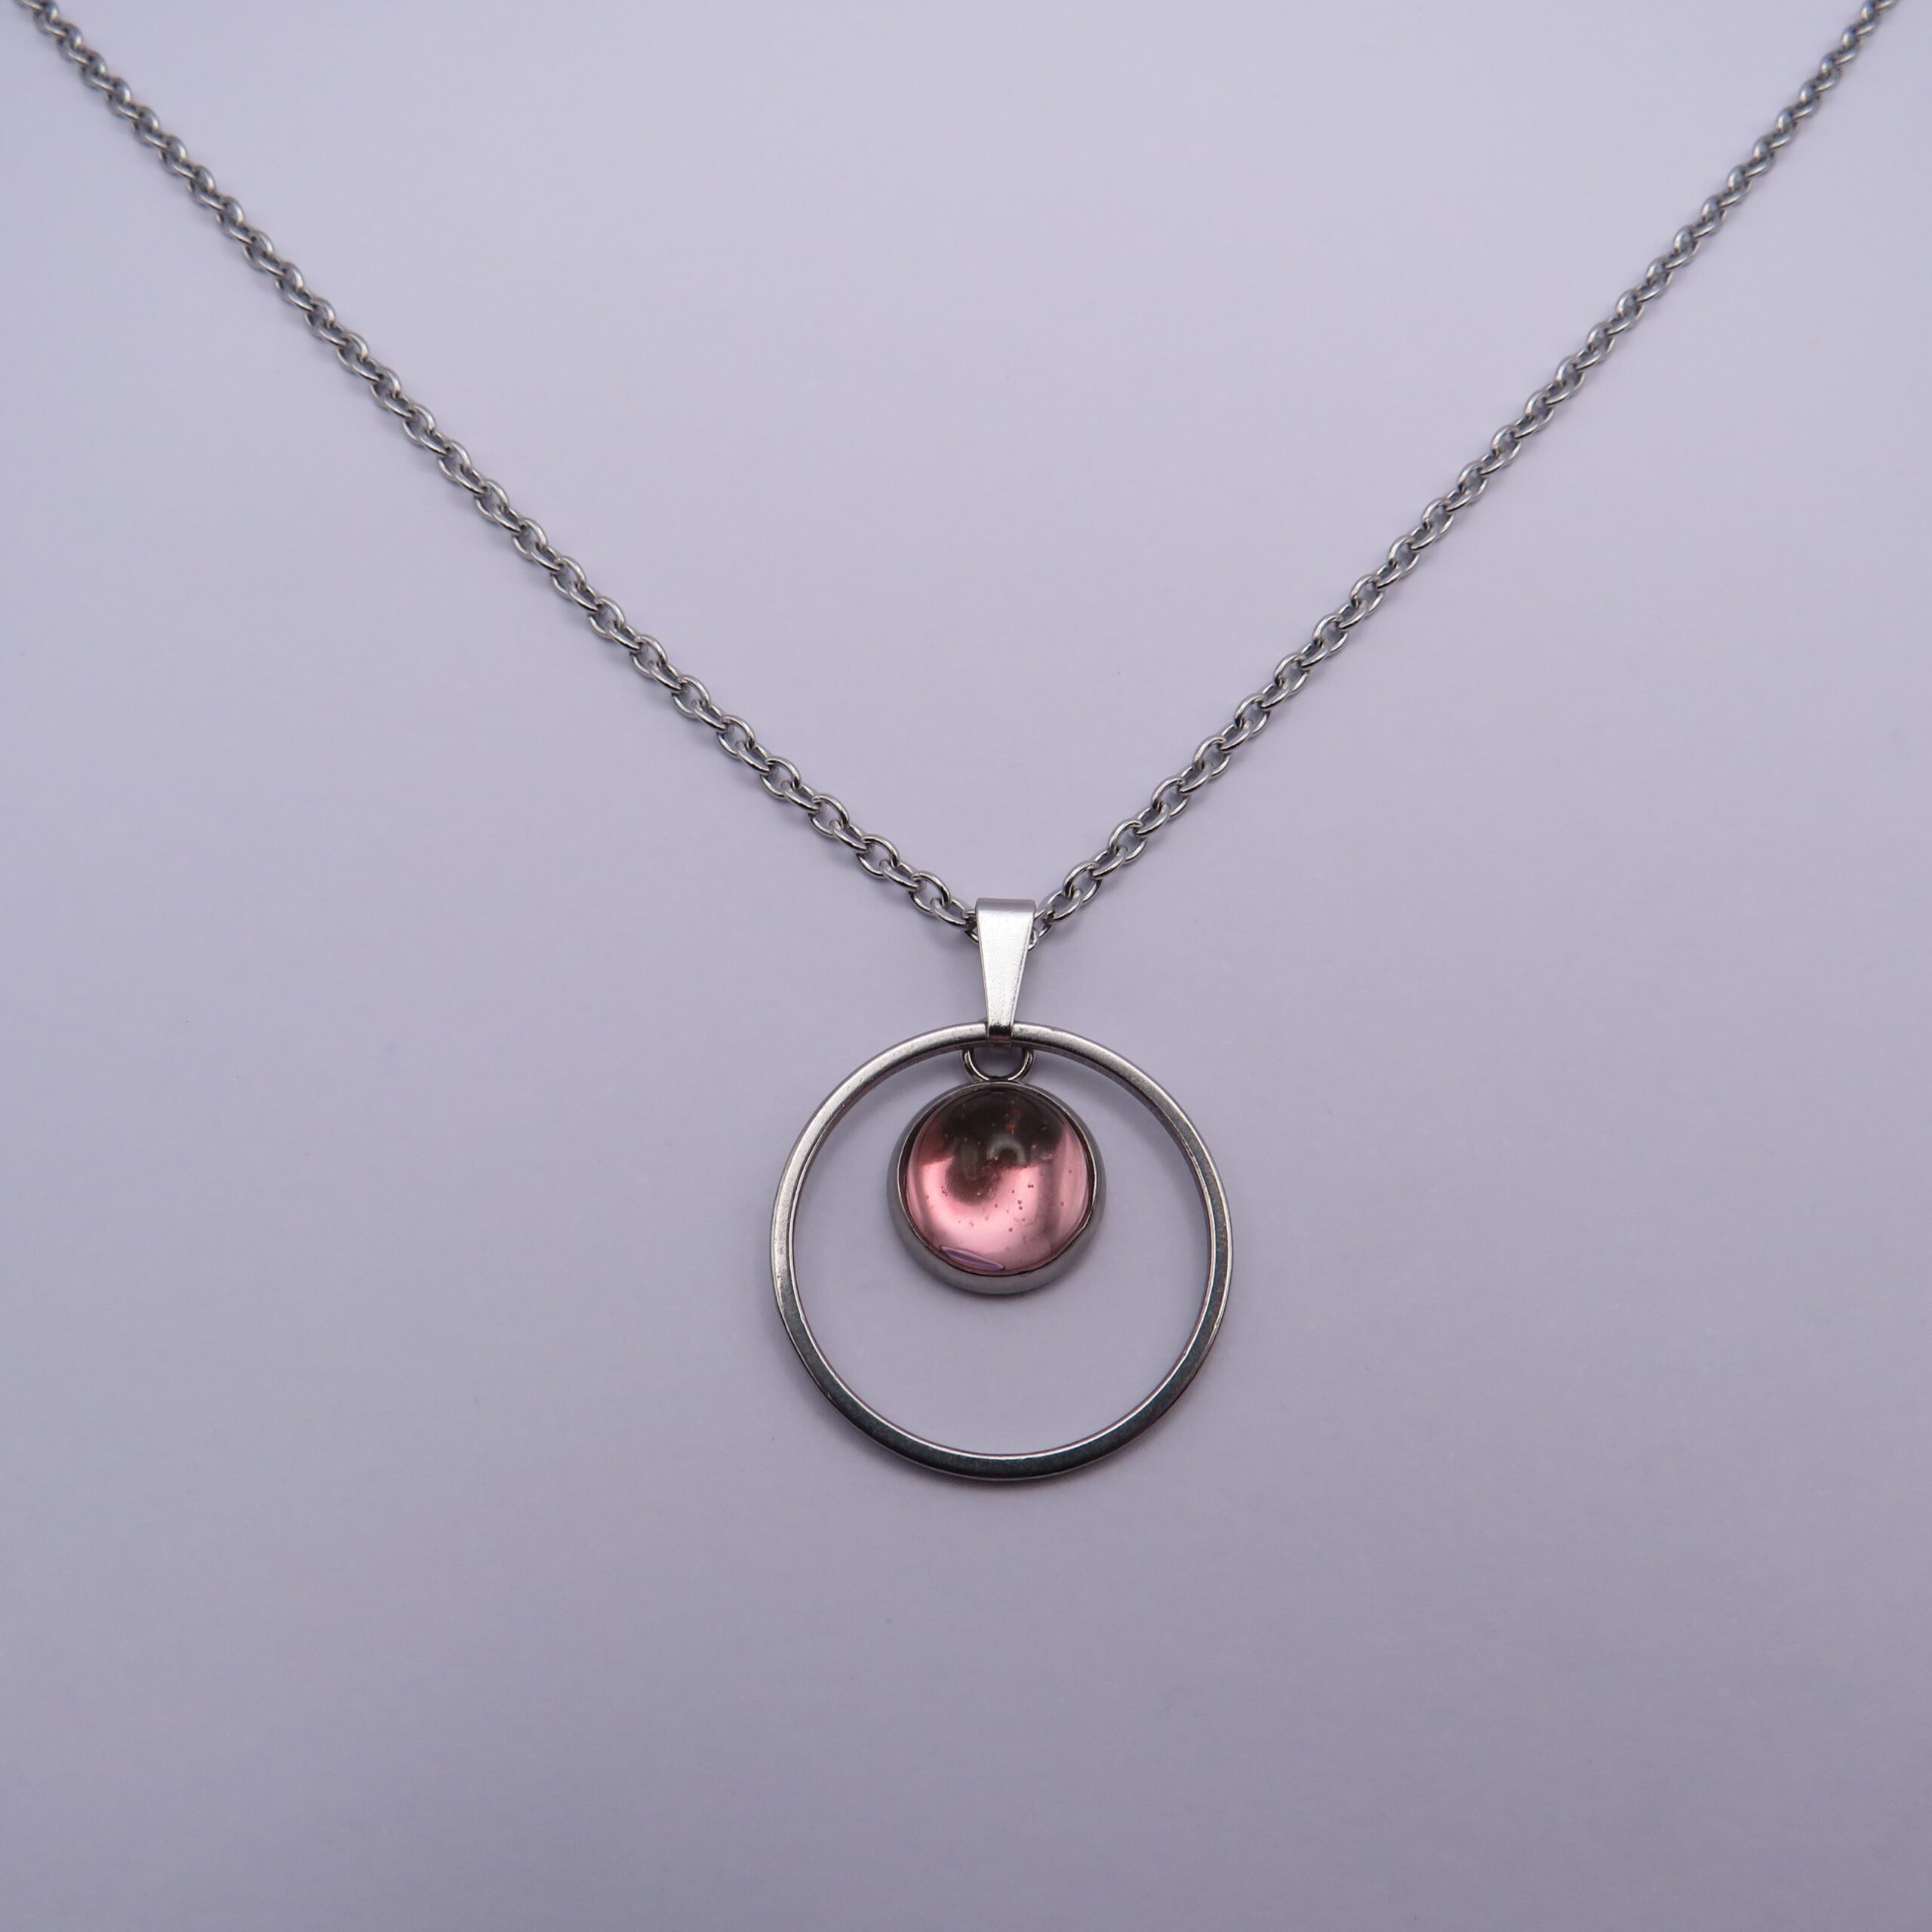 Stainless Steel Pink Cabochon Circle Pendant Necklace